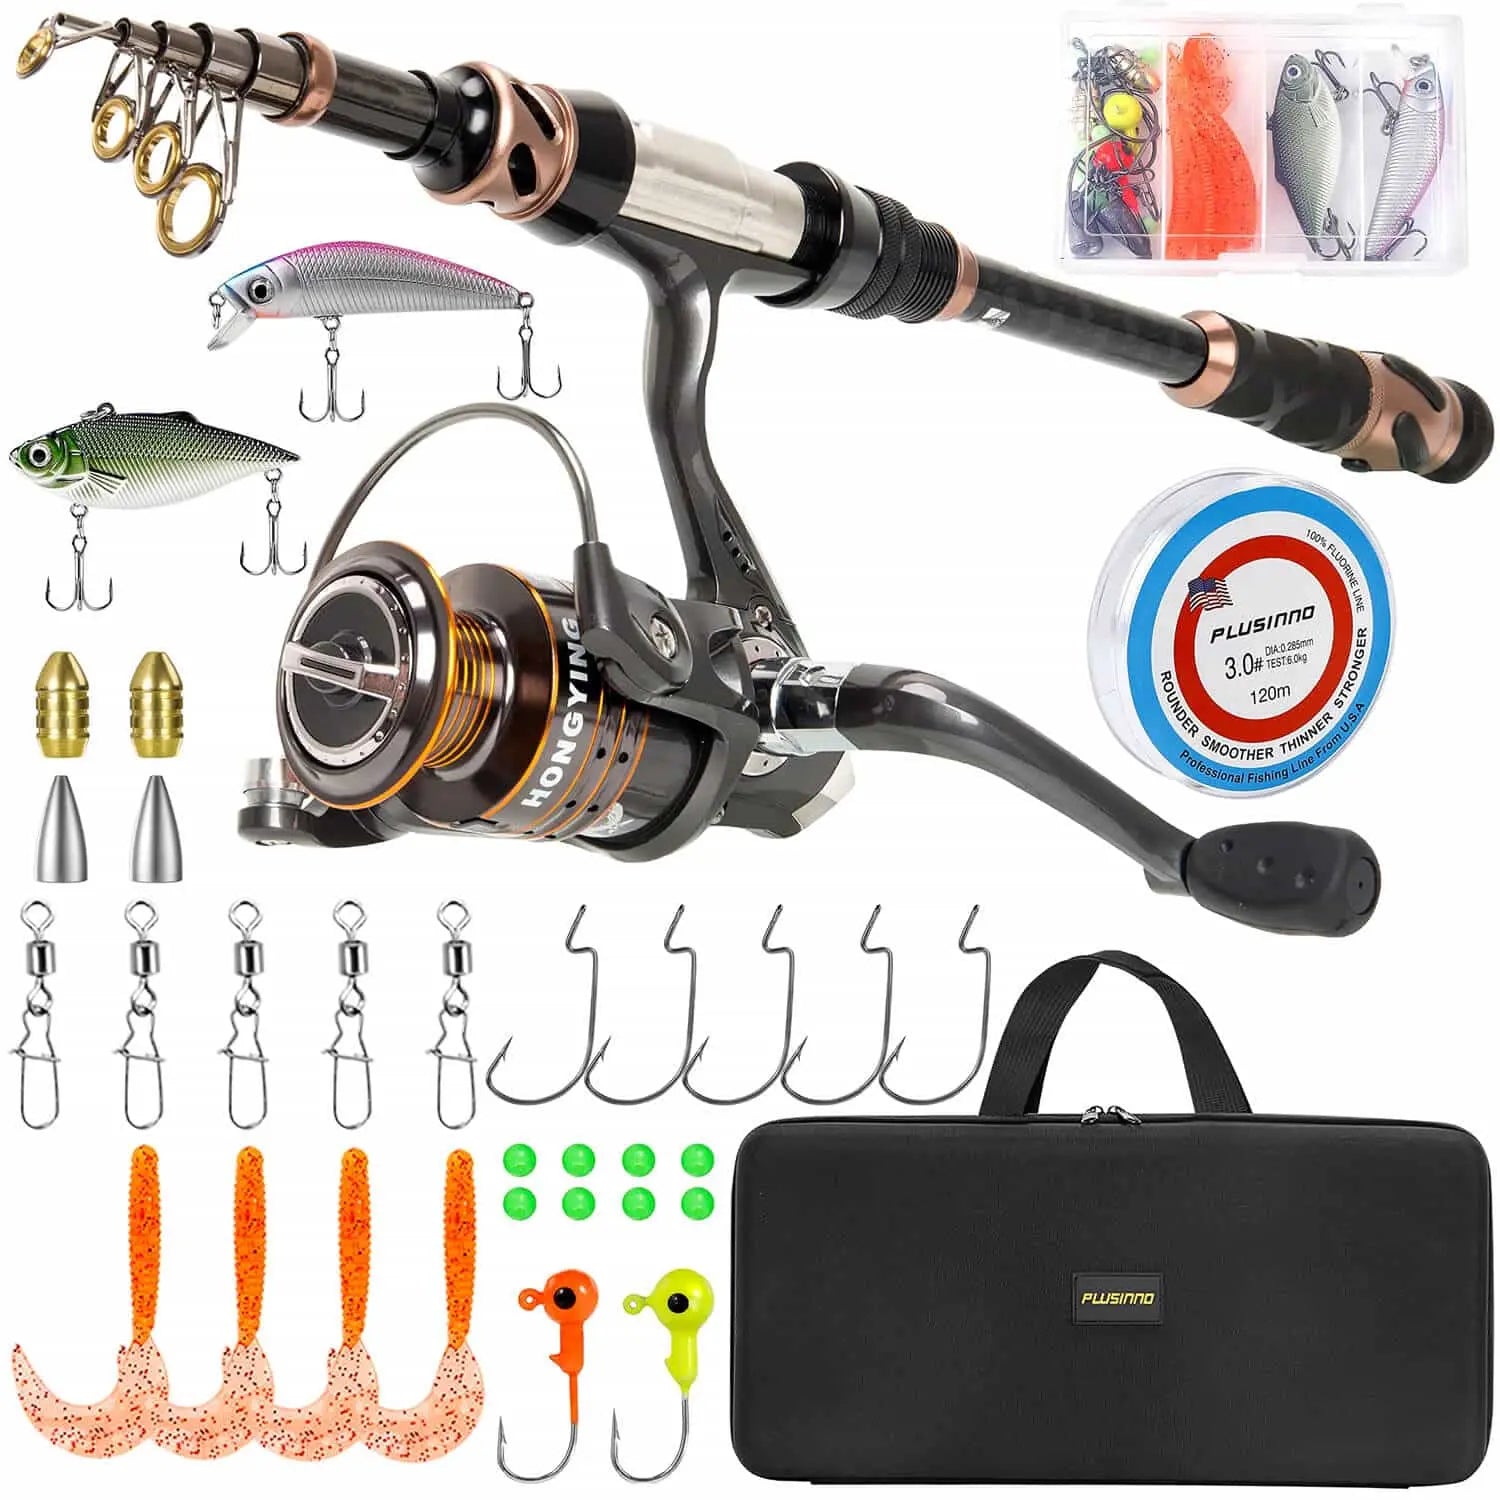 PLUSINNO Freedom Traveler Spinning Fishing Rod and Reel Combos, 6